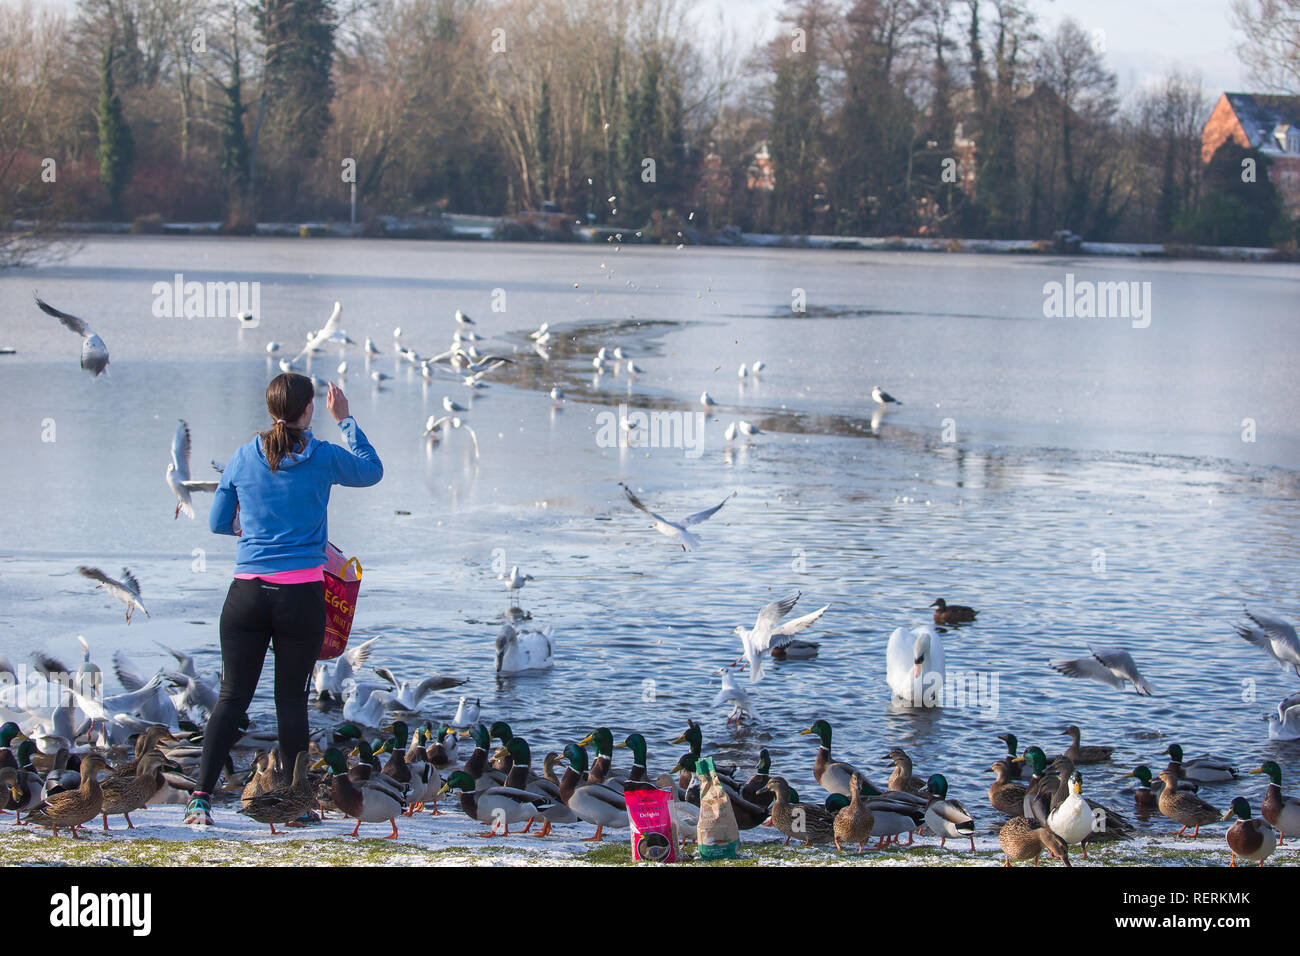 Kidderminster, UK. 23rd January, 2019. UK weather: light snow remains on the ground and temperatures are only just above freezing. This kind-hearted young lady regularly feeds the ducks and swans at least four days a week, at a substantial cost to herself, knowing that when freezing conditions strike, our wildlife needs as much help as possible to save them from perishing during the winter months. Credit Lee Hudson/Alamy Live News. Stock Photo